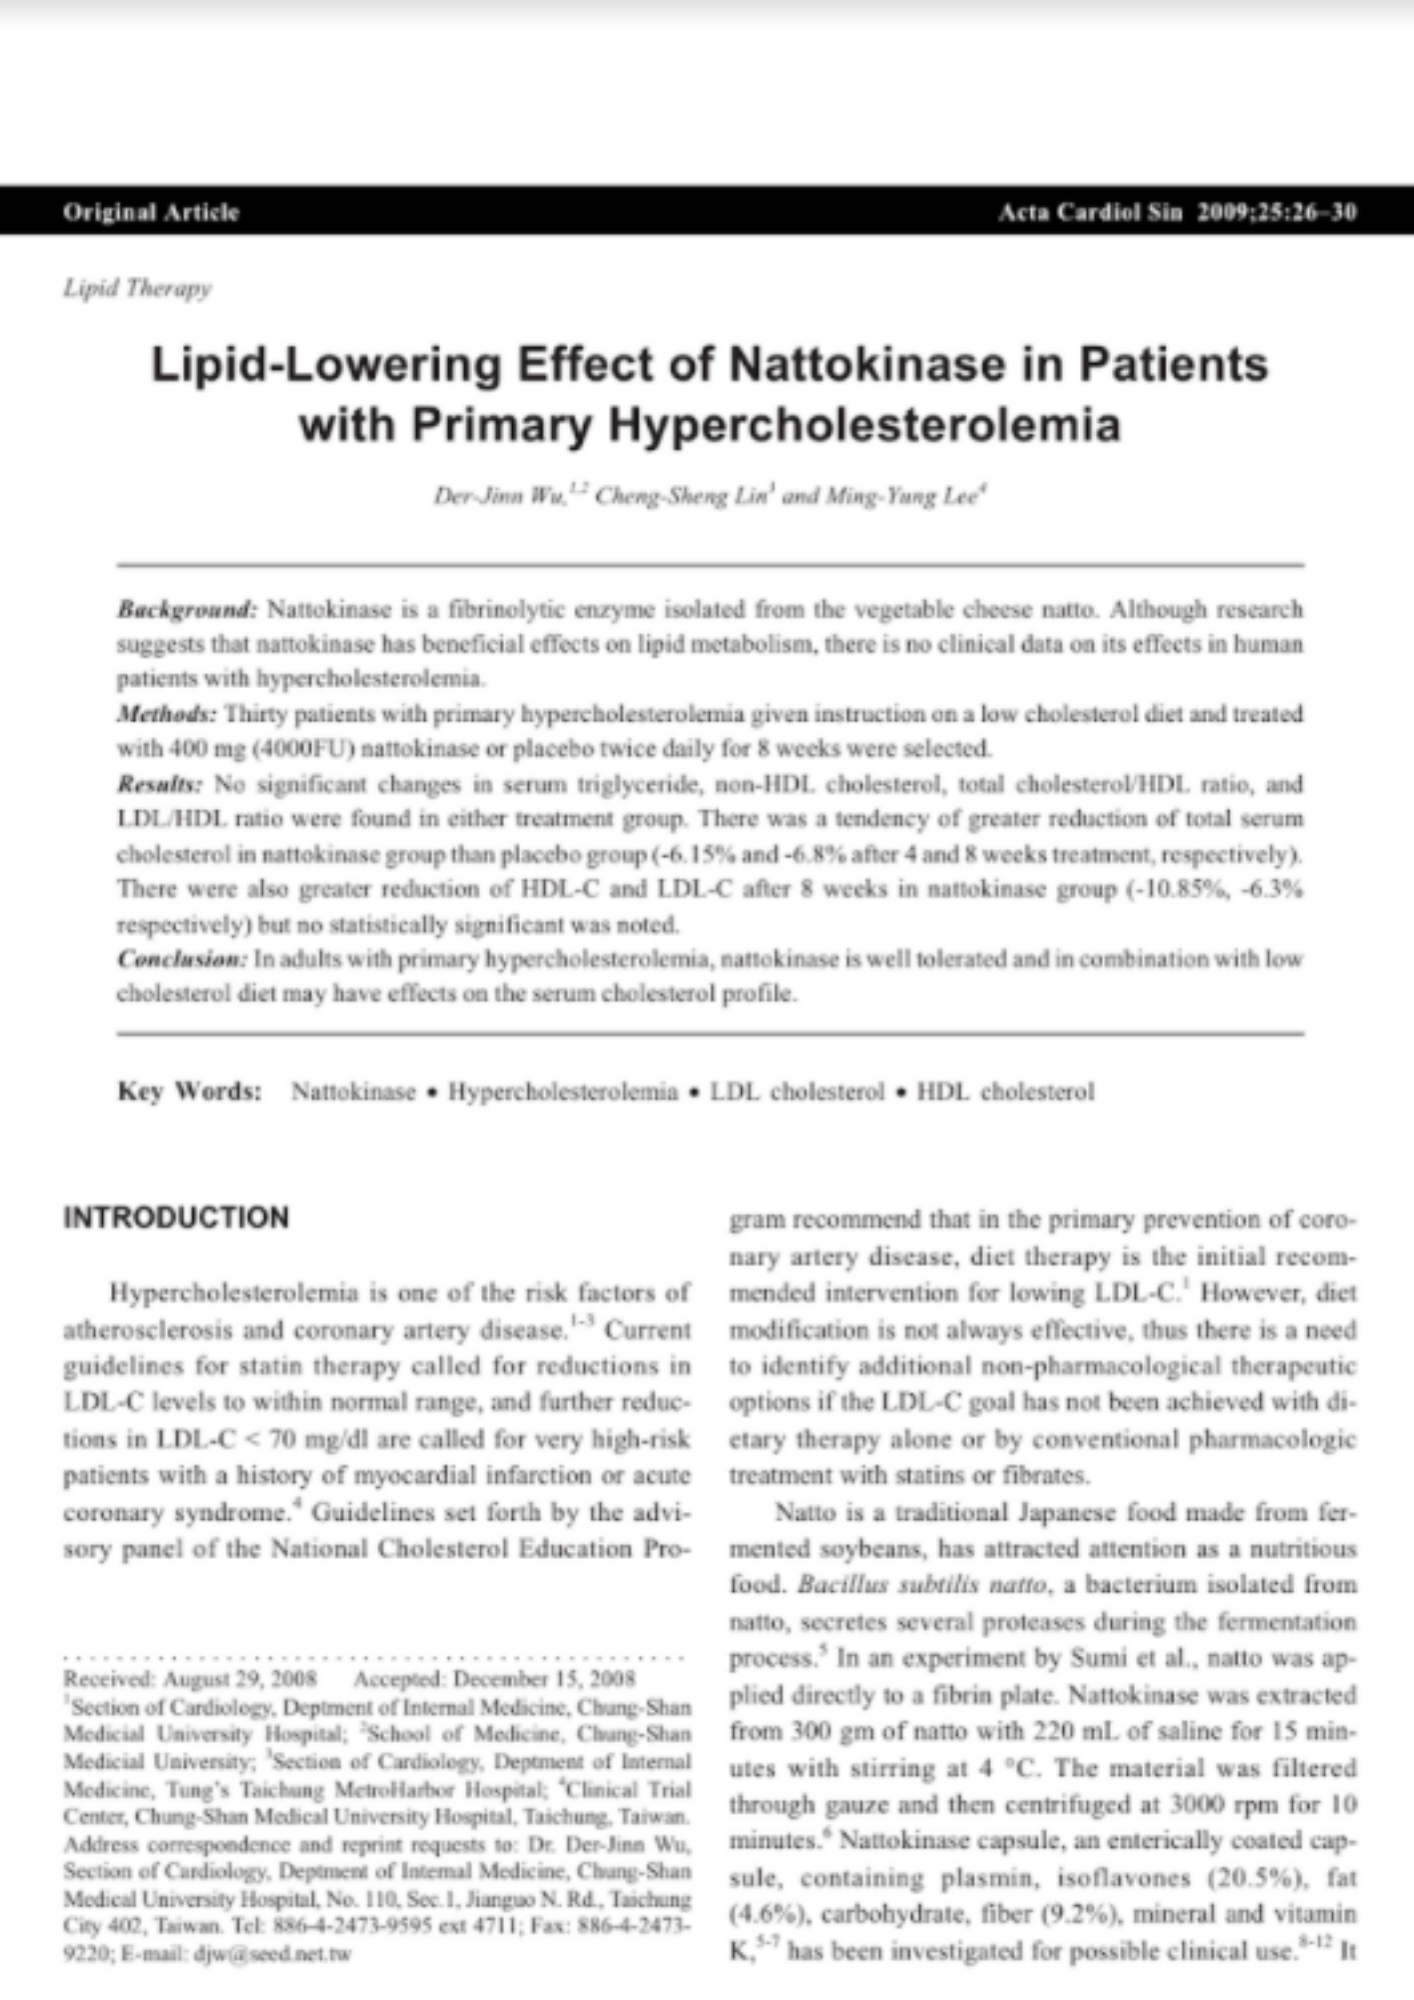 Lipid-Lowering Effect of Nattokinase in Patients with Primary Hypercholesterolemia